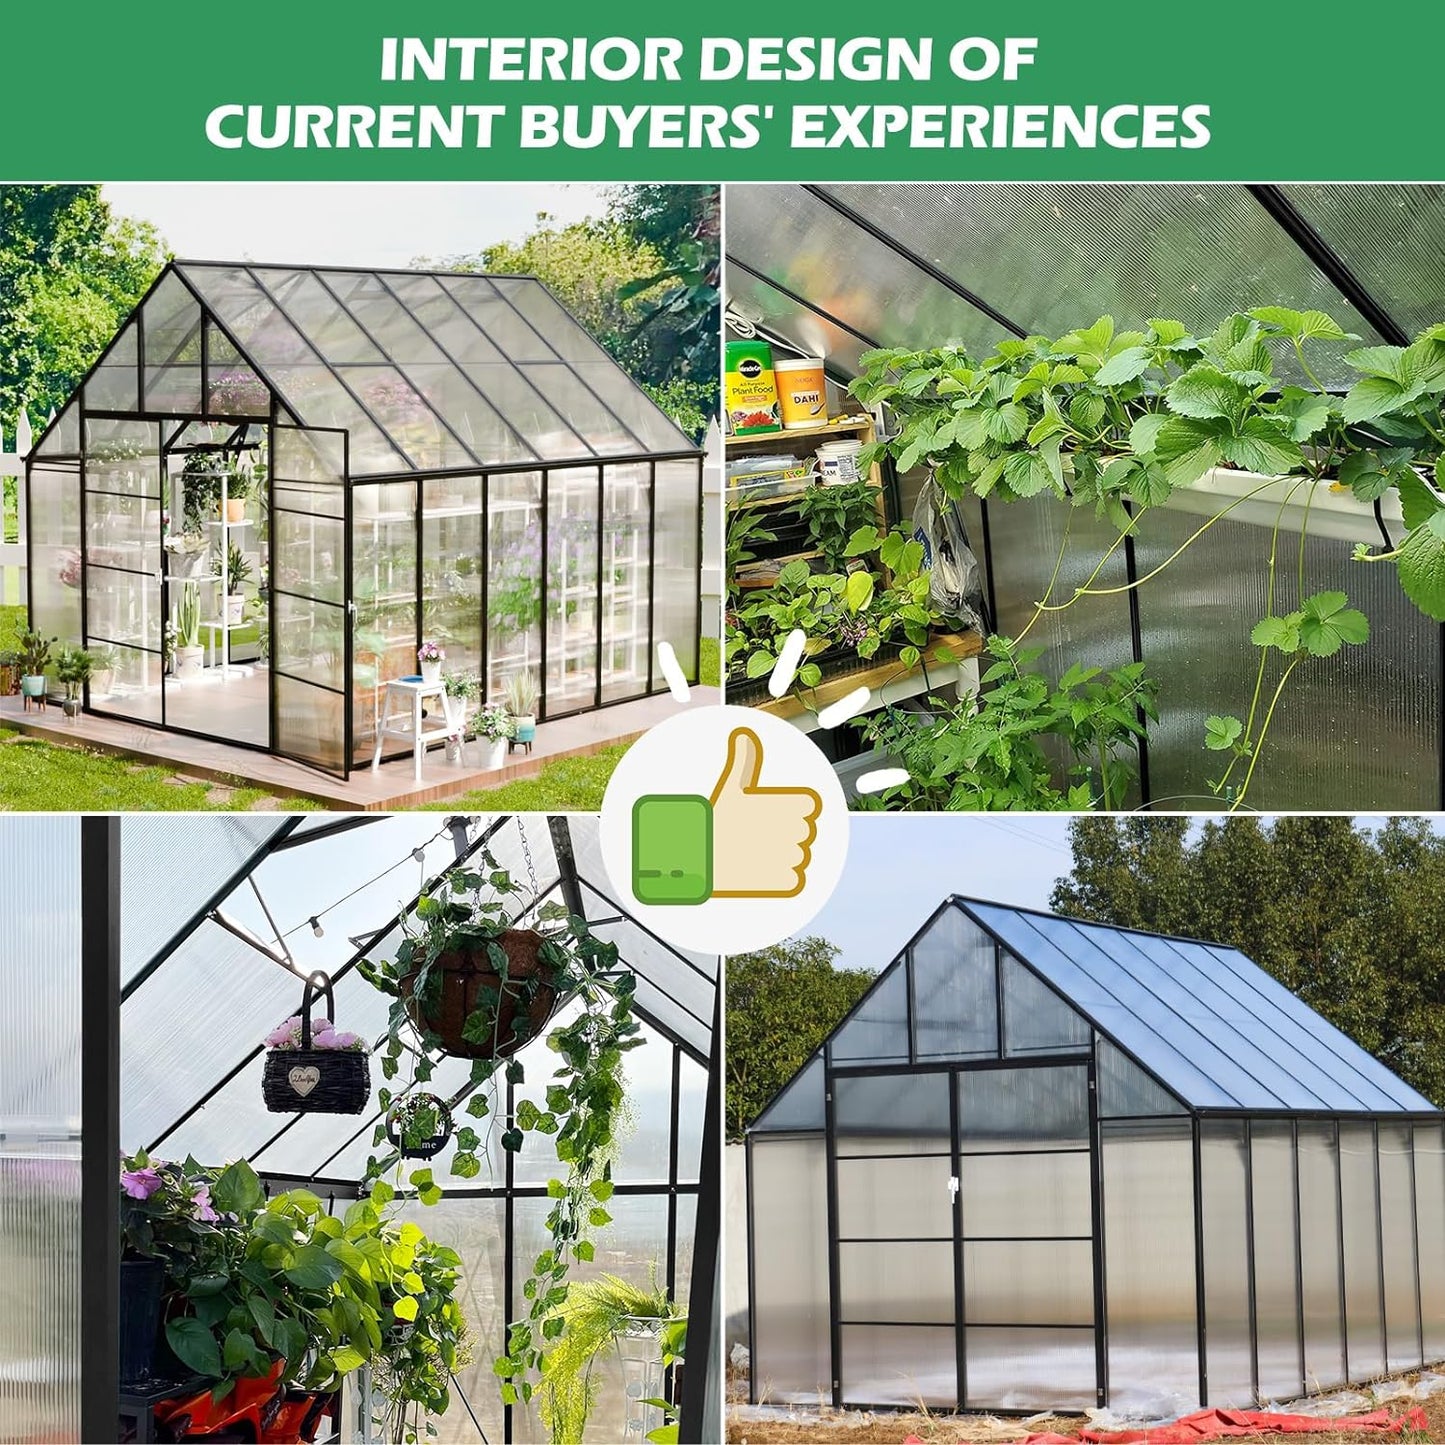 10X12 FT Polycarbonate Greenhouse Kit for Outdoors, Upgraded Heavy Duty Aluminum Walk-In Greenhouse with Quick Setup Structure, Rain Gutter and Vents, Green House for Outside, Garden, Backyard